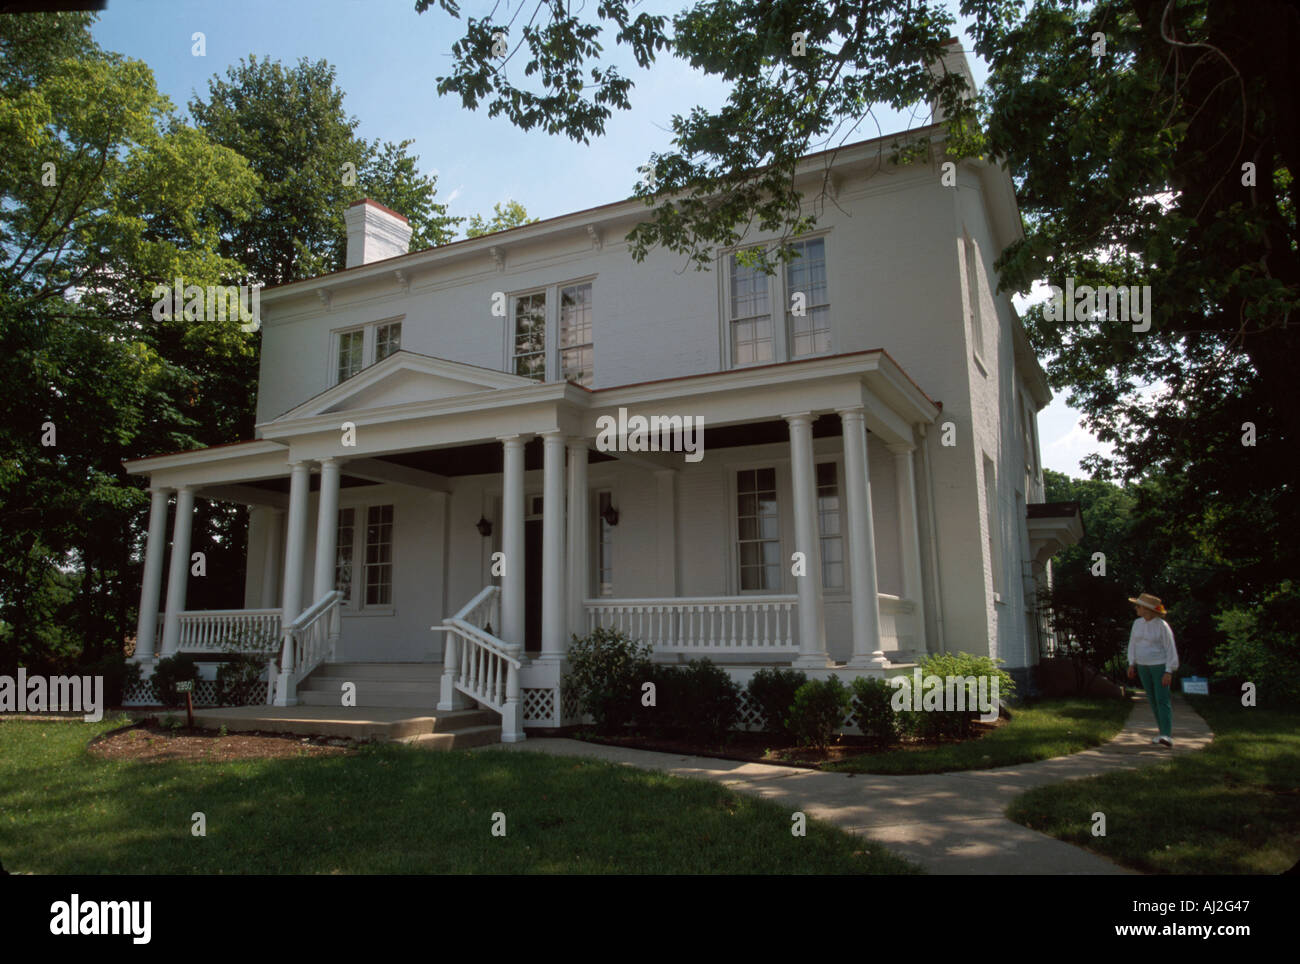 Cincinnati Ohio,Harriet Beecher Stowe house houses home homes residence,built 1833 now cultural center promoting,Black Blacks African Africans ethnic Stock Photo